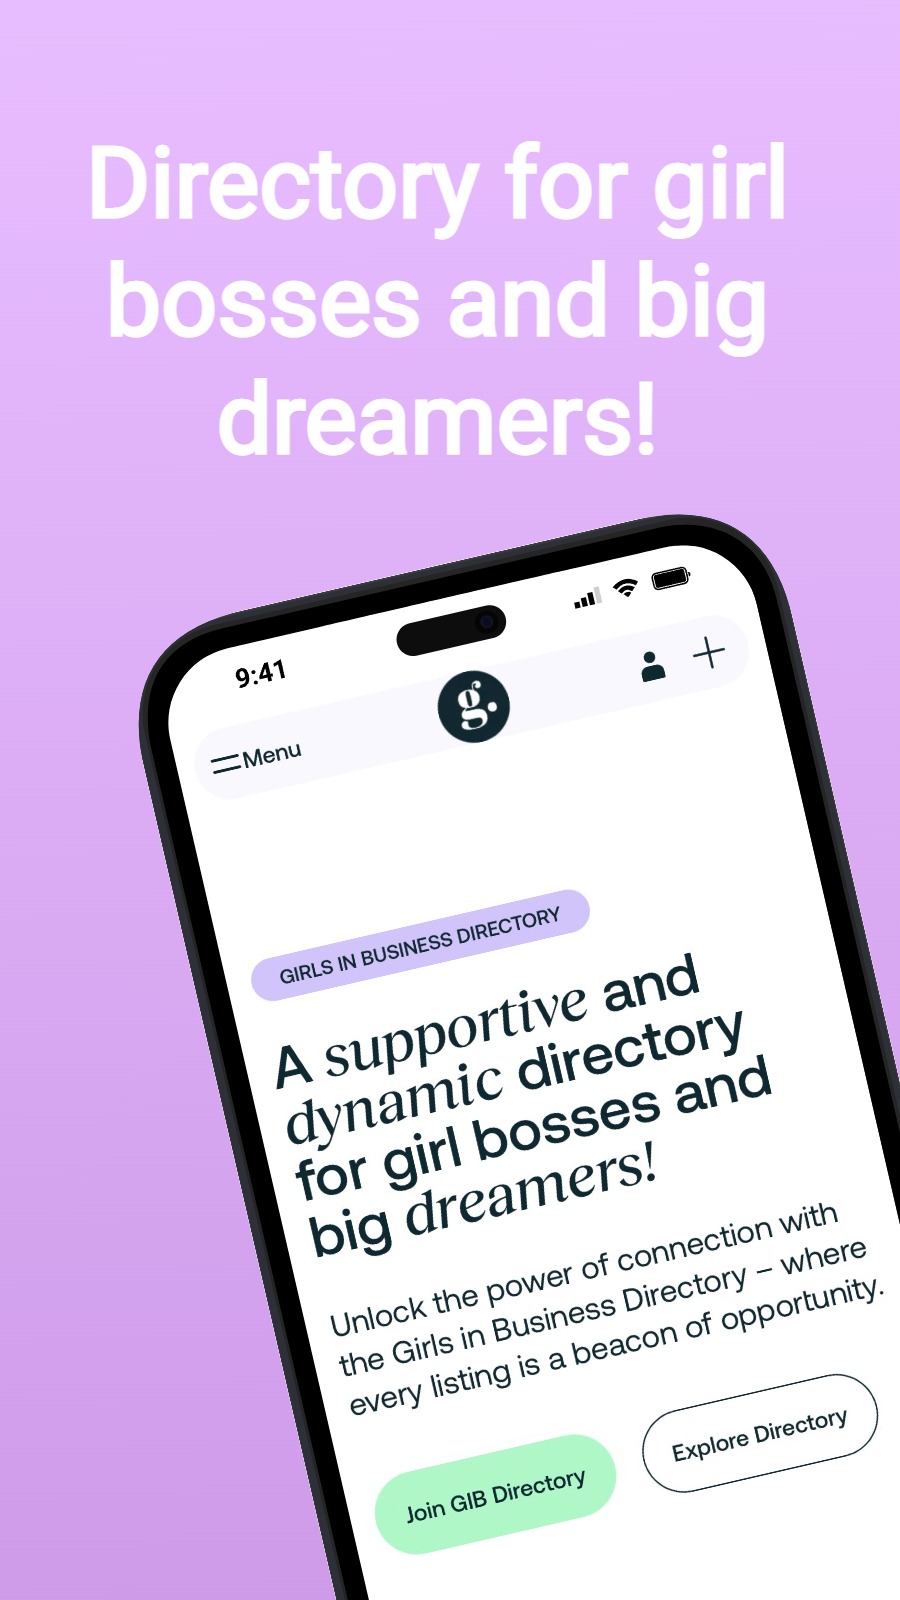 Directory for girl bosses and big dreamers!